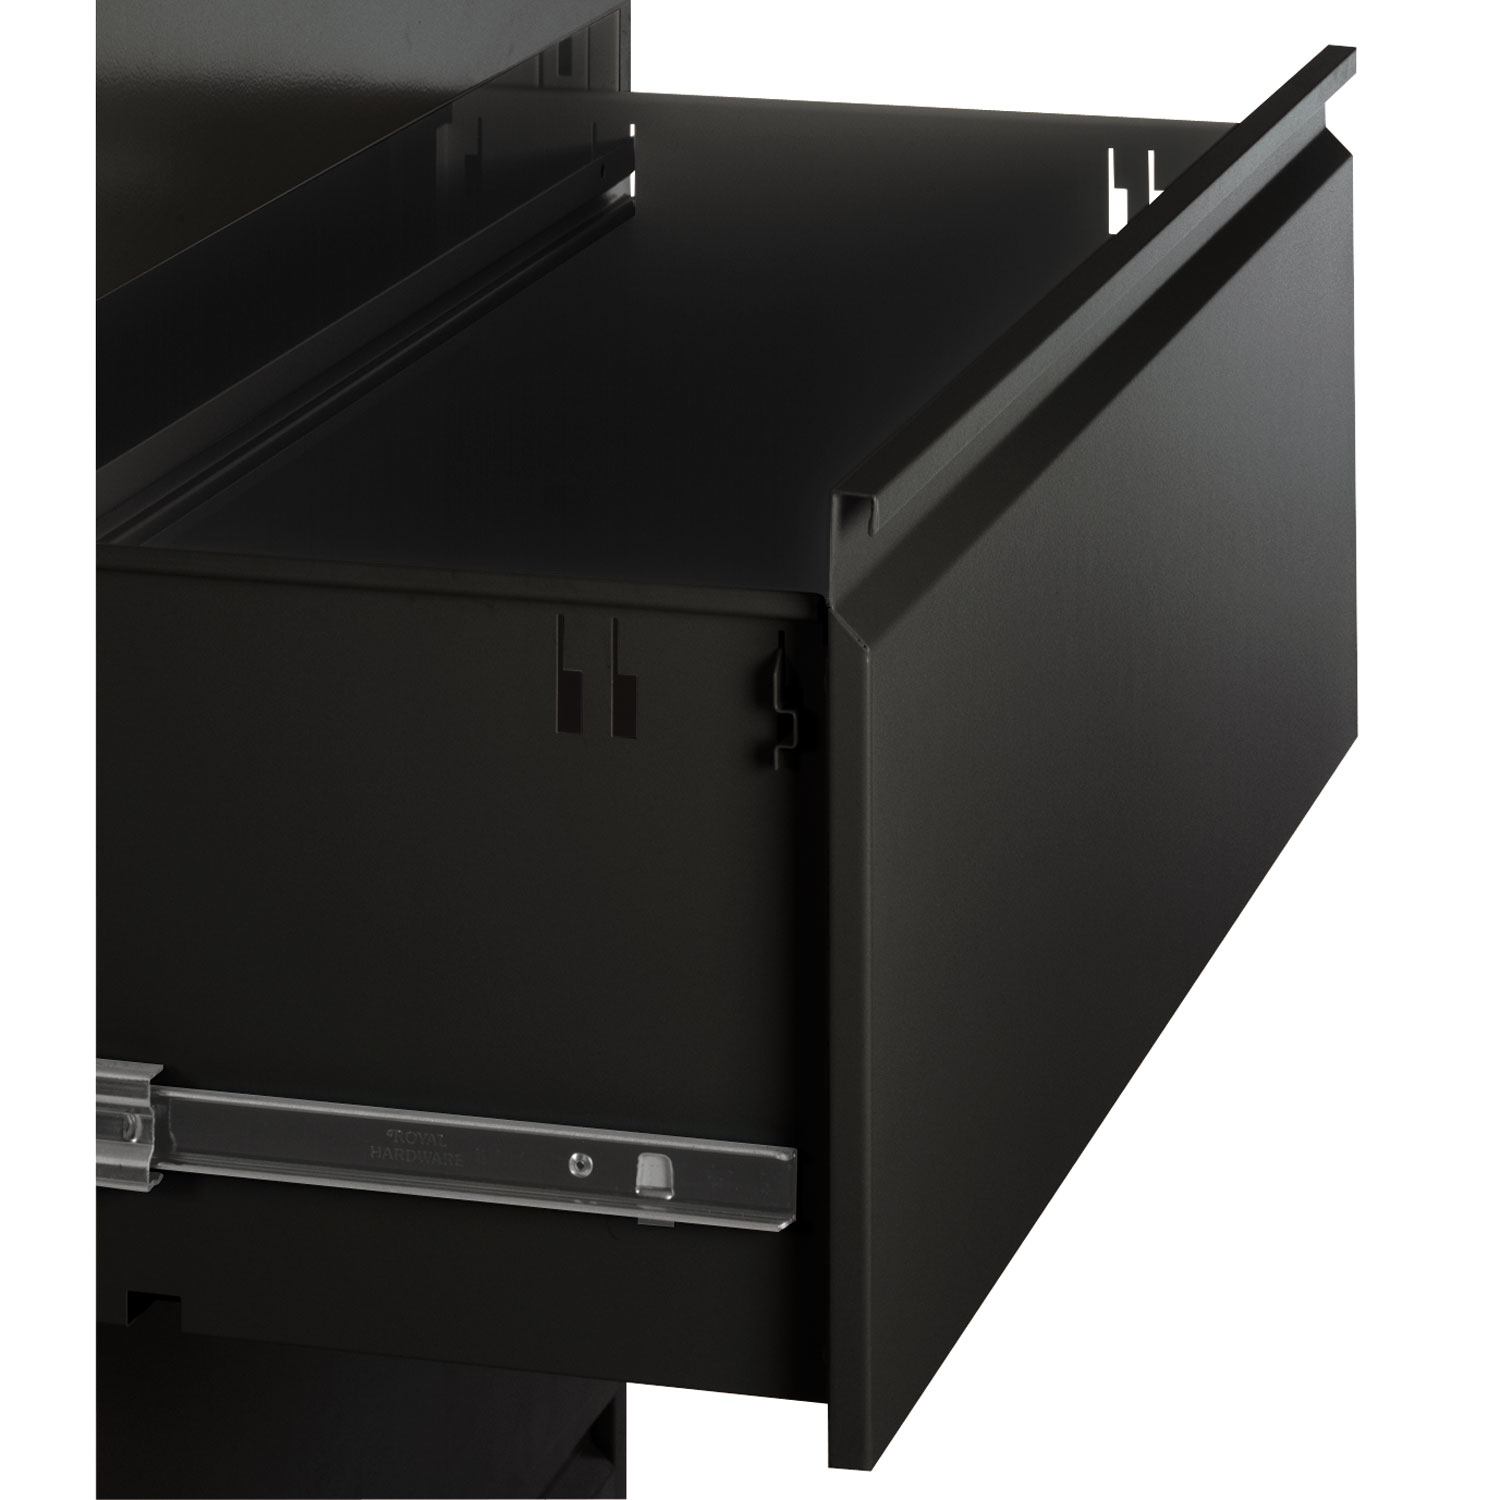 Four-Drawer Lateral File Cabinet, 42w x 19-1/4d x 53-1/4h, Black